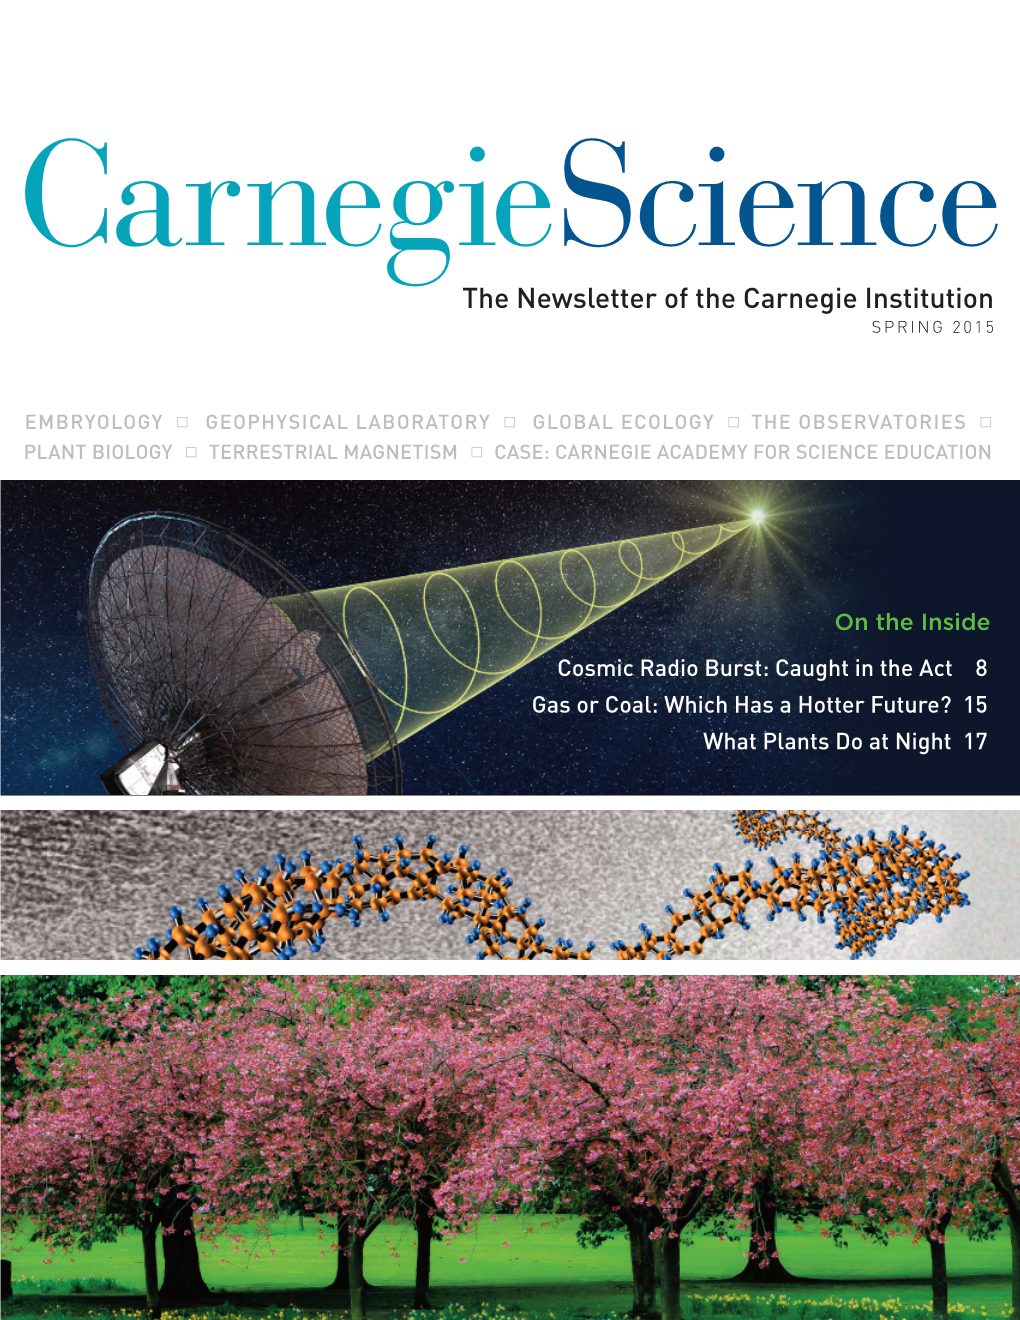 The Newsletter of the Carnegie Institution SPRING 2015